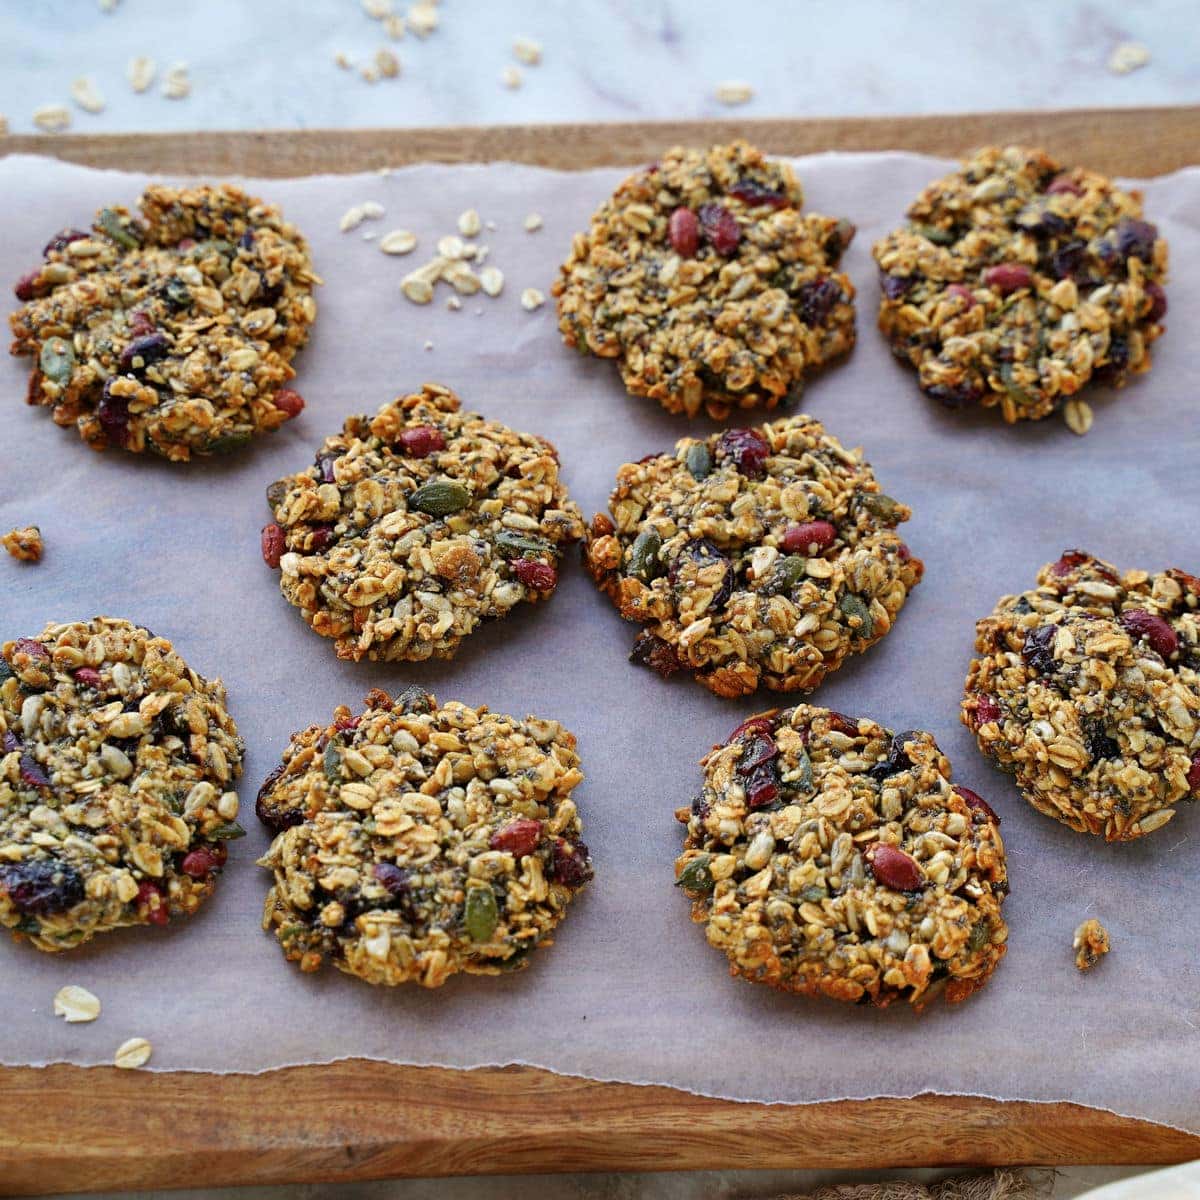 sugar-free cookies with seeds on wooden board